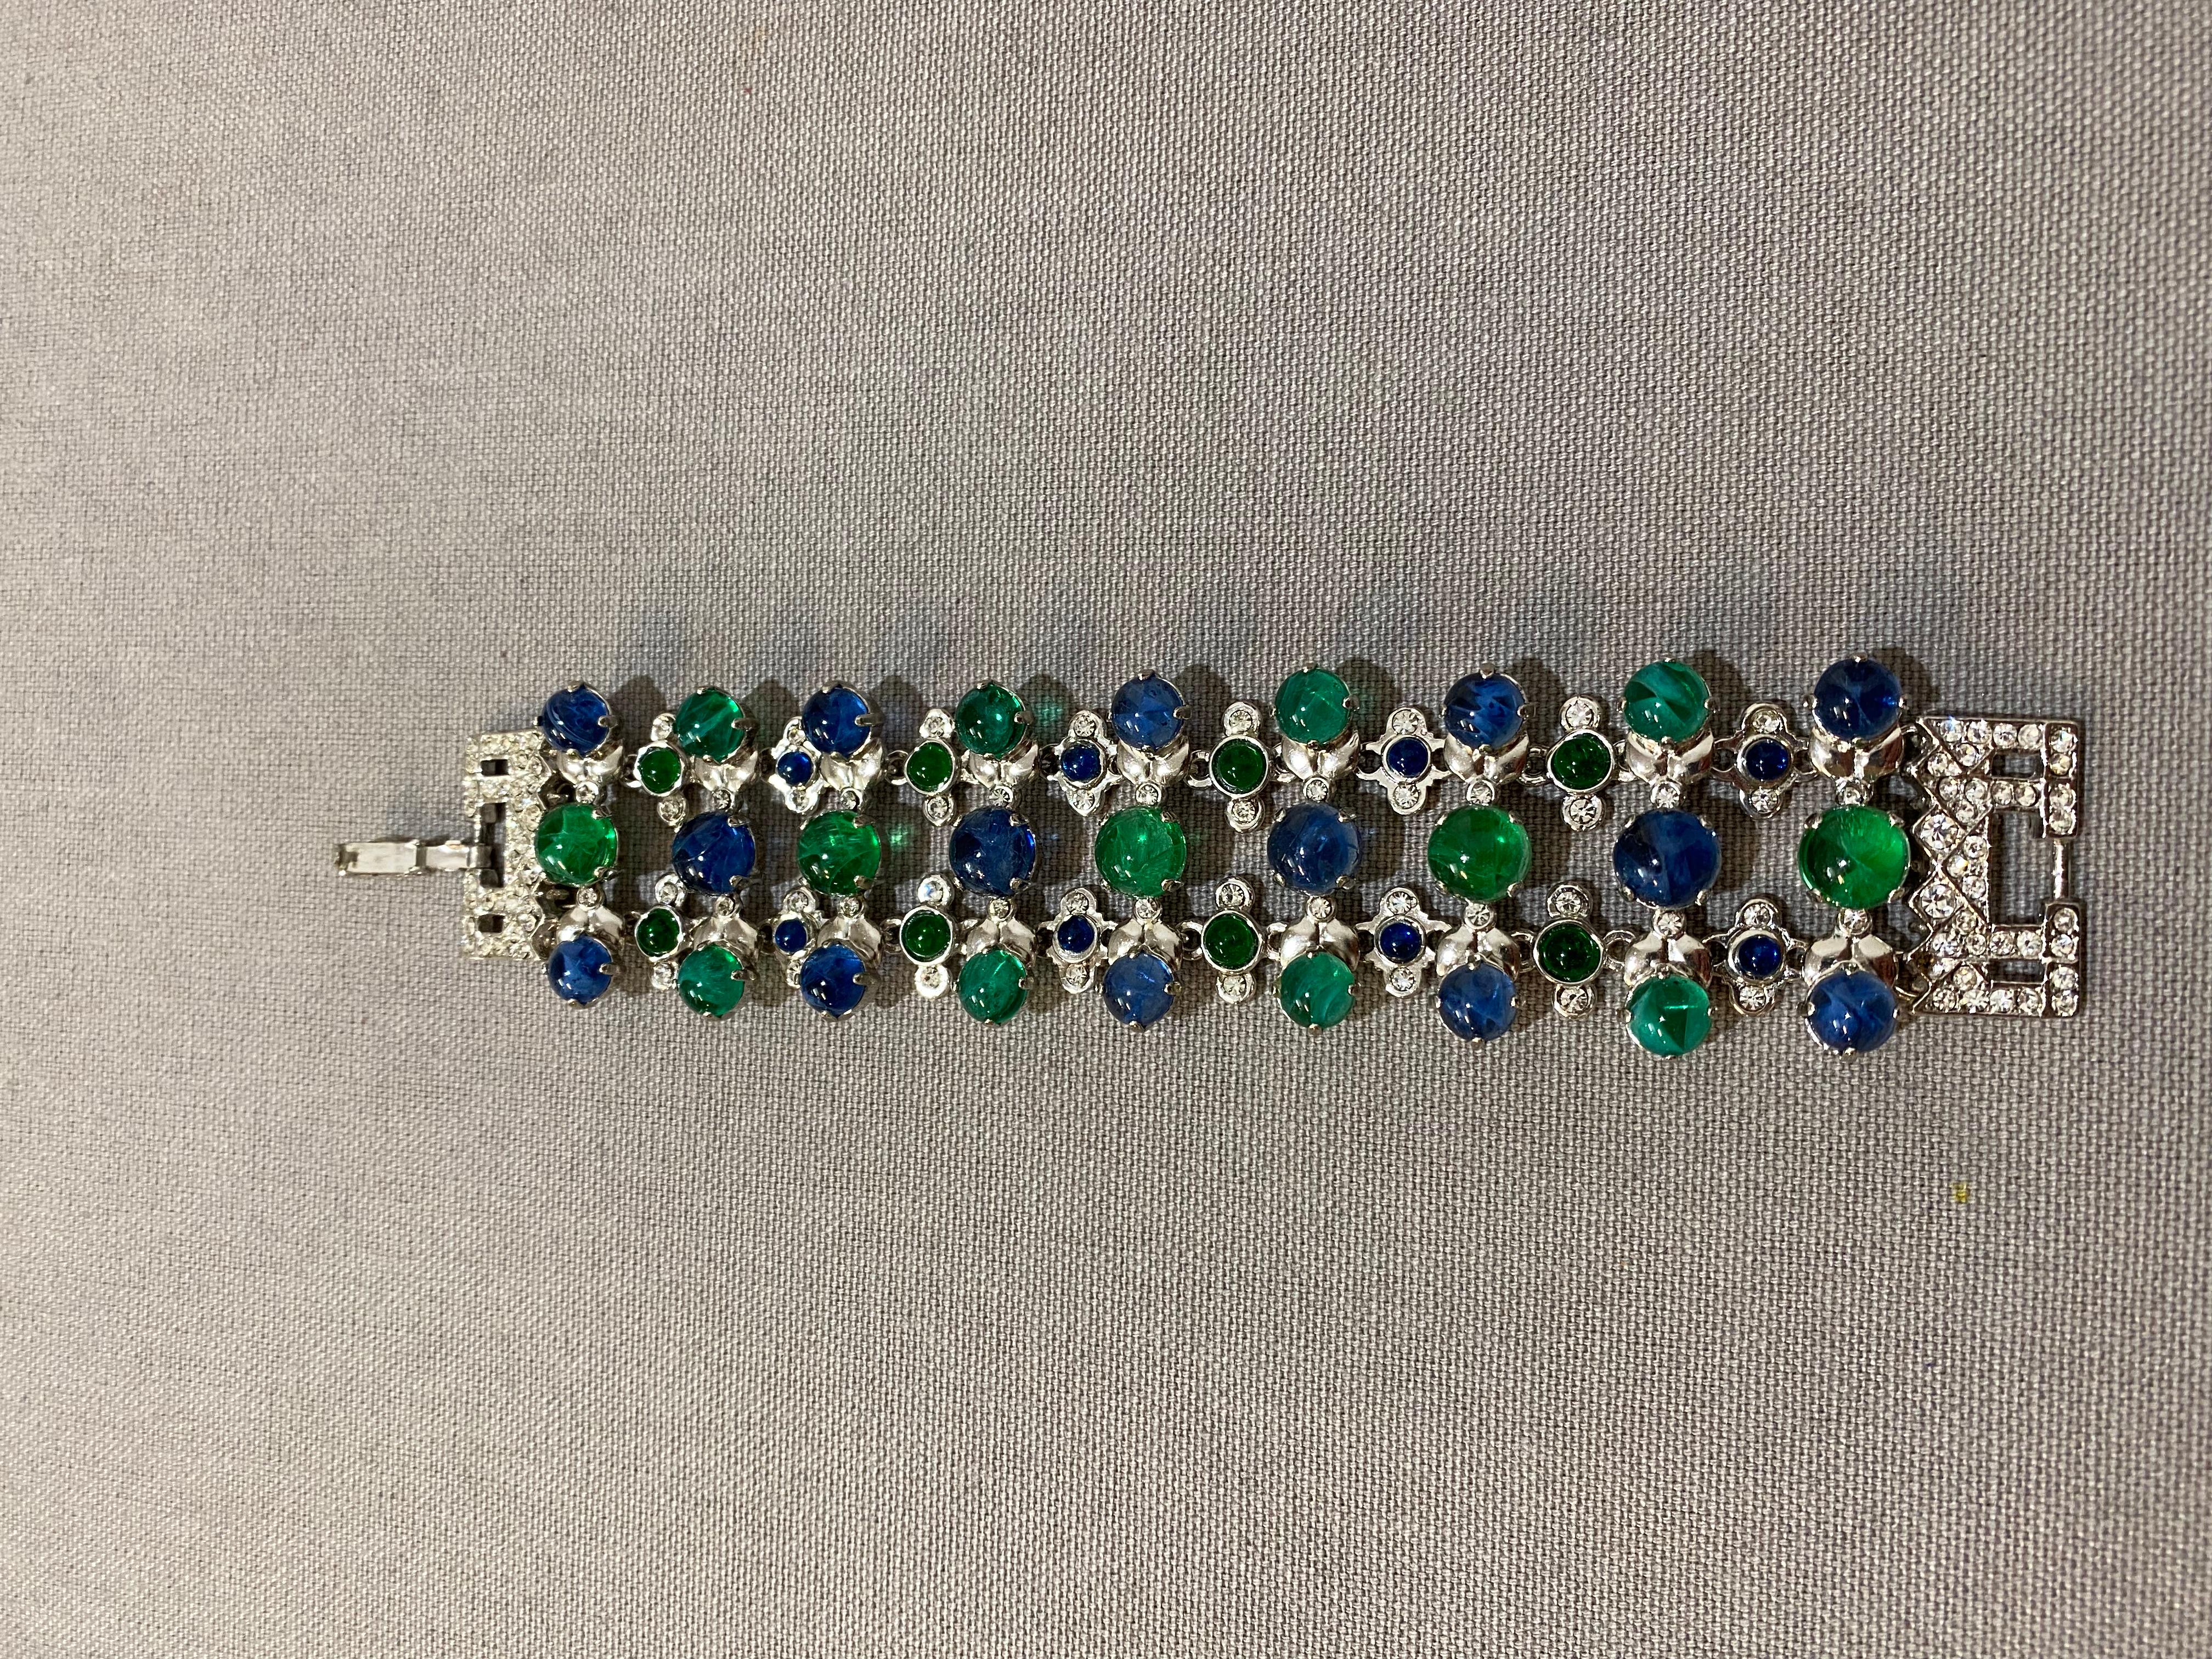 Fantastic piece by Carlo Zini
One of the world greatest bijoux designers
Non allergenic rhodium
Amazing hand application of swarovski crystals 
Emerlad and sapphire like cabochon 
Wrist cm 17 (6.69 inches)
100% Artisanal work
Made in